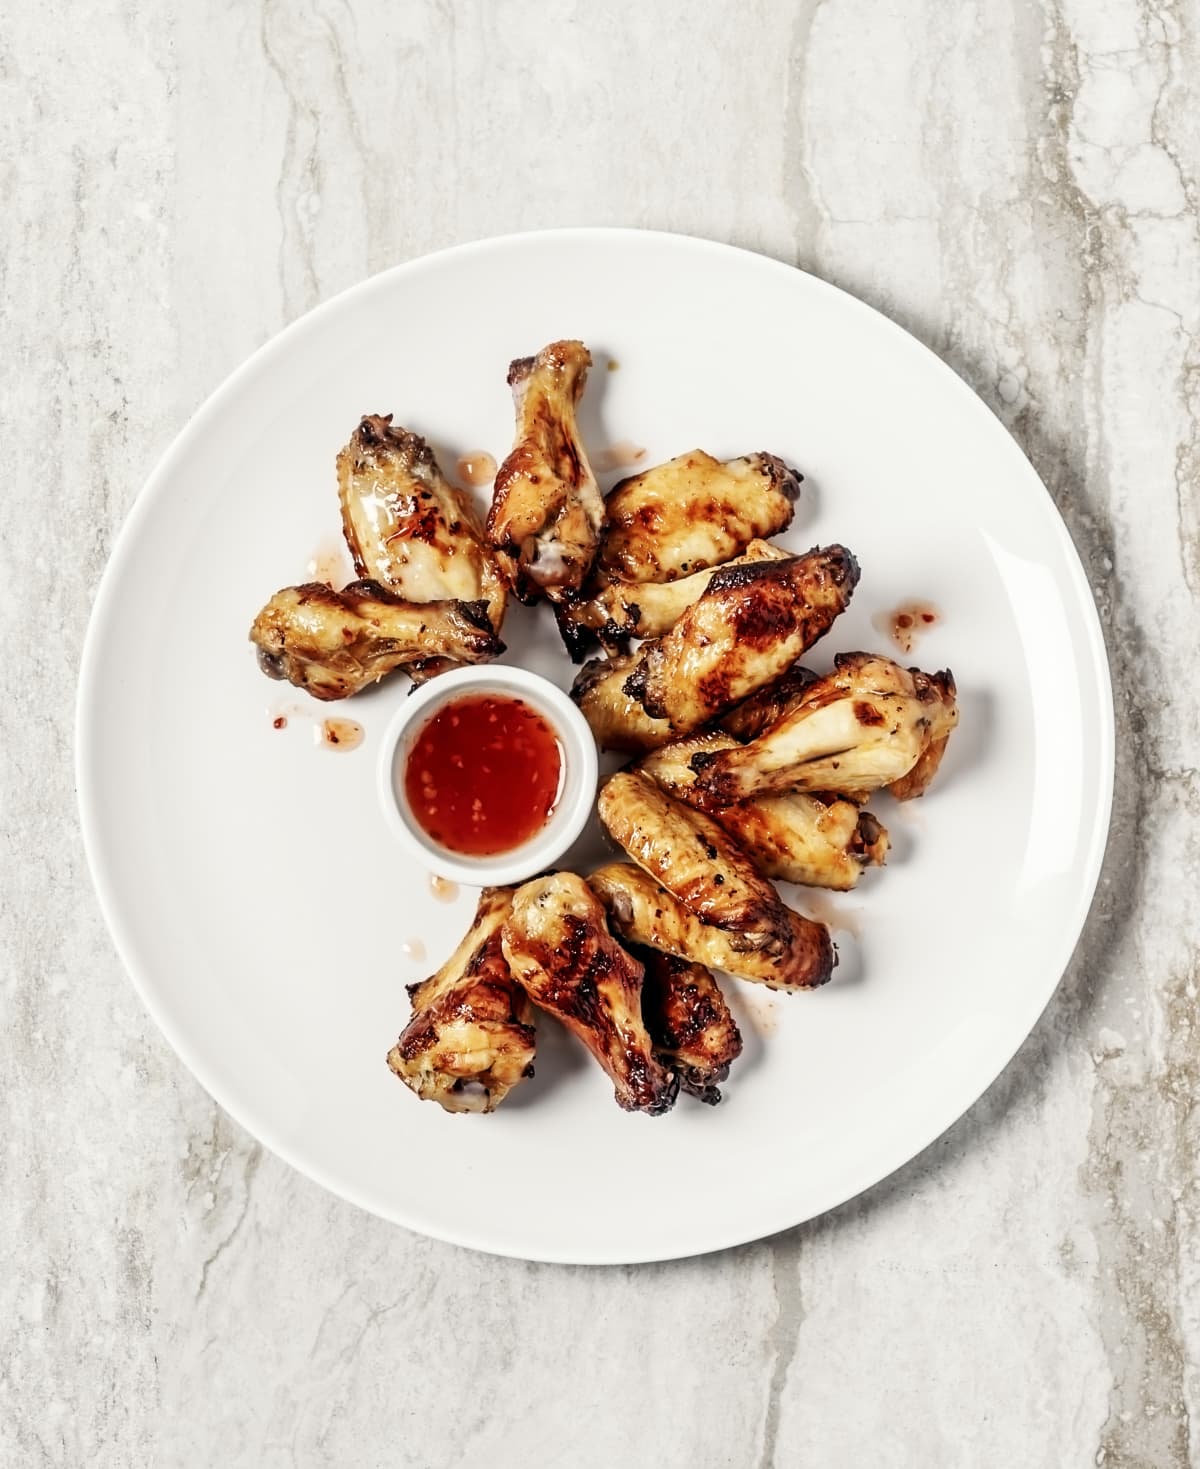 A plate of roasted chicken wings with dipping sauce